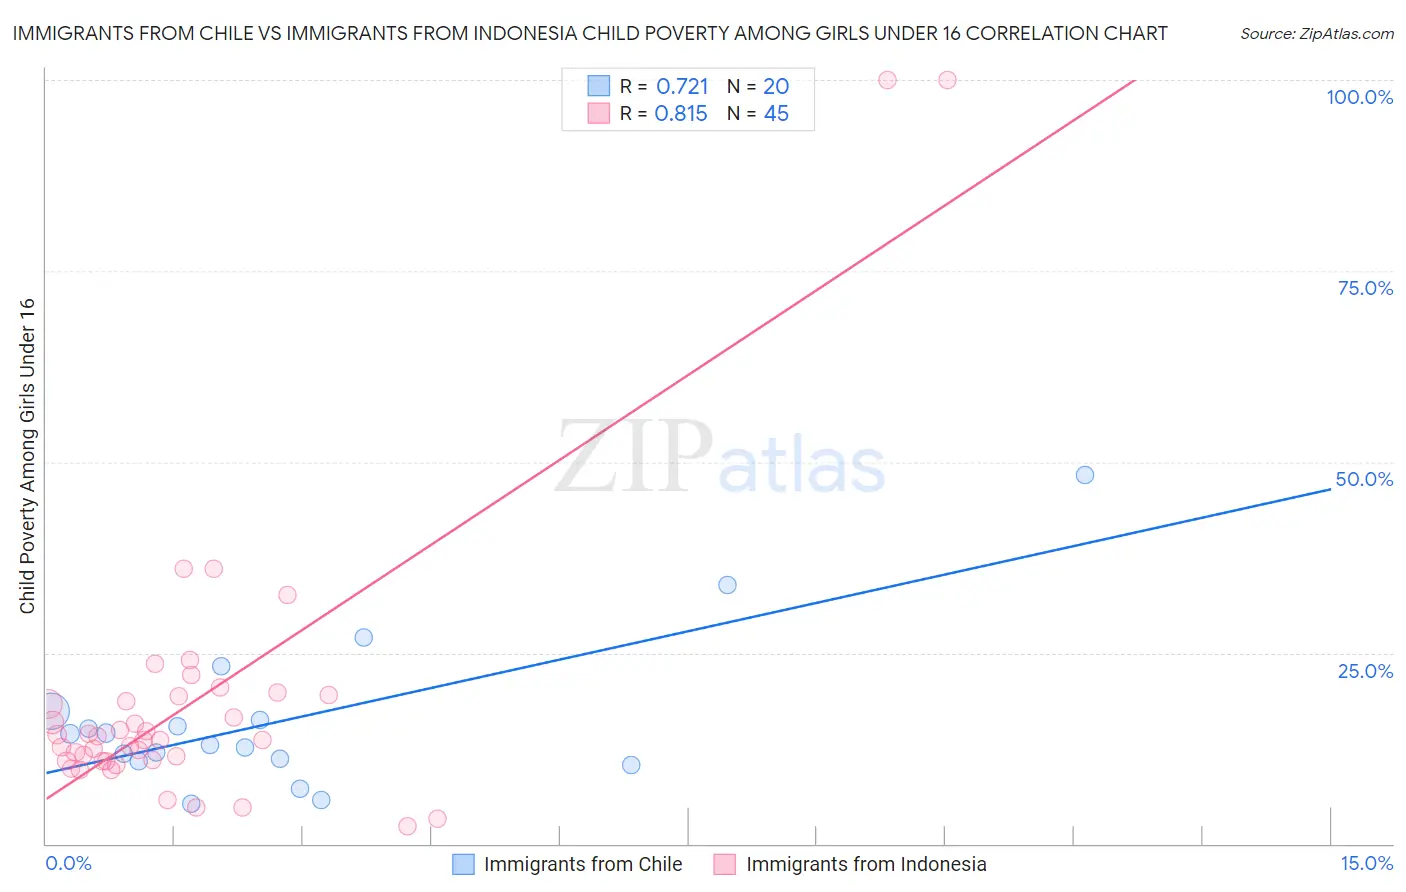 Immigrants from Chile vs Immigrants from Indonesia Child Poverty Among Girls Under 16